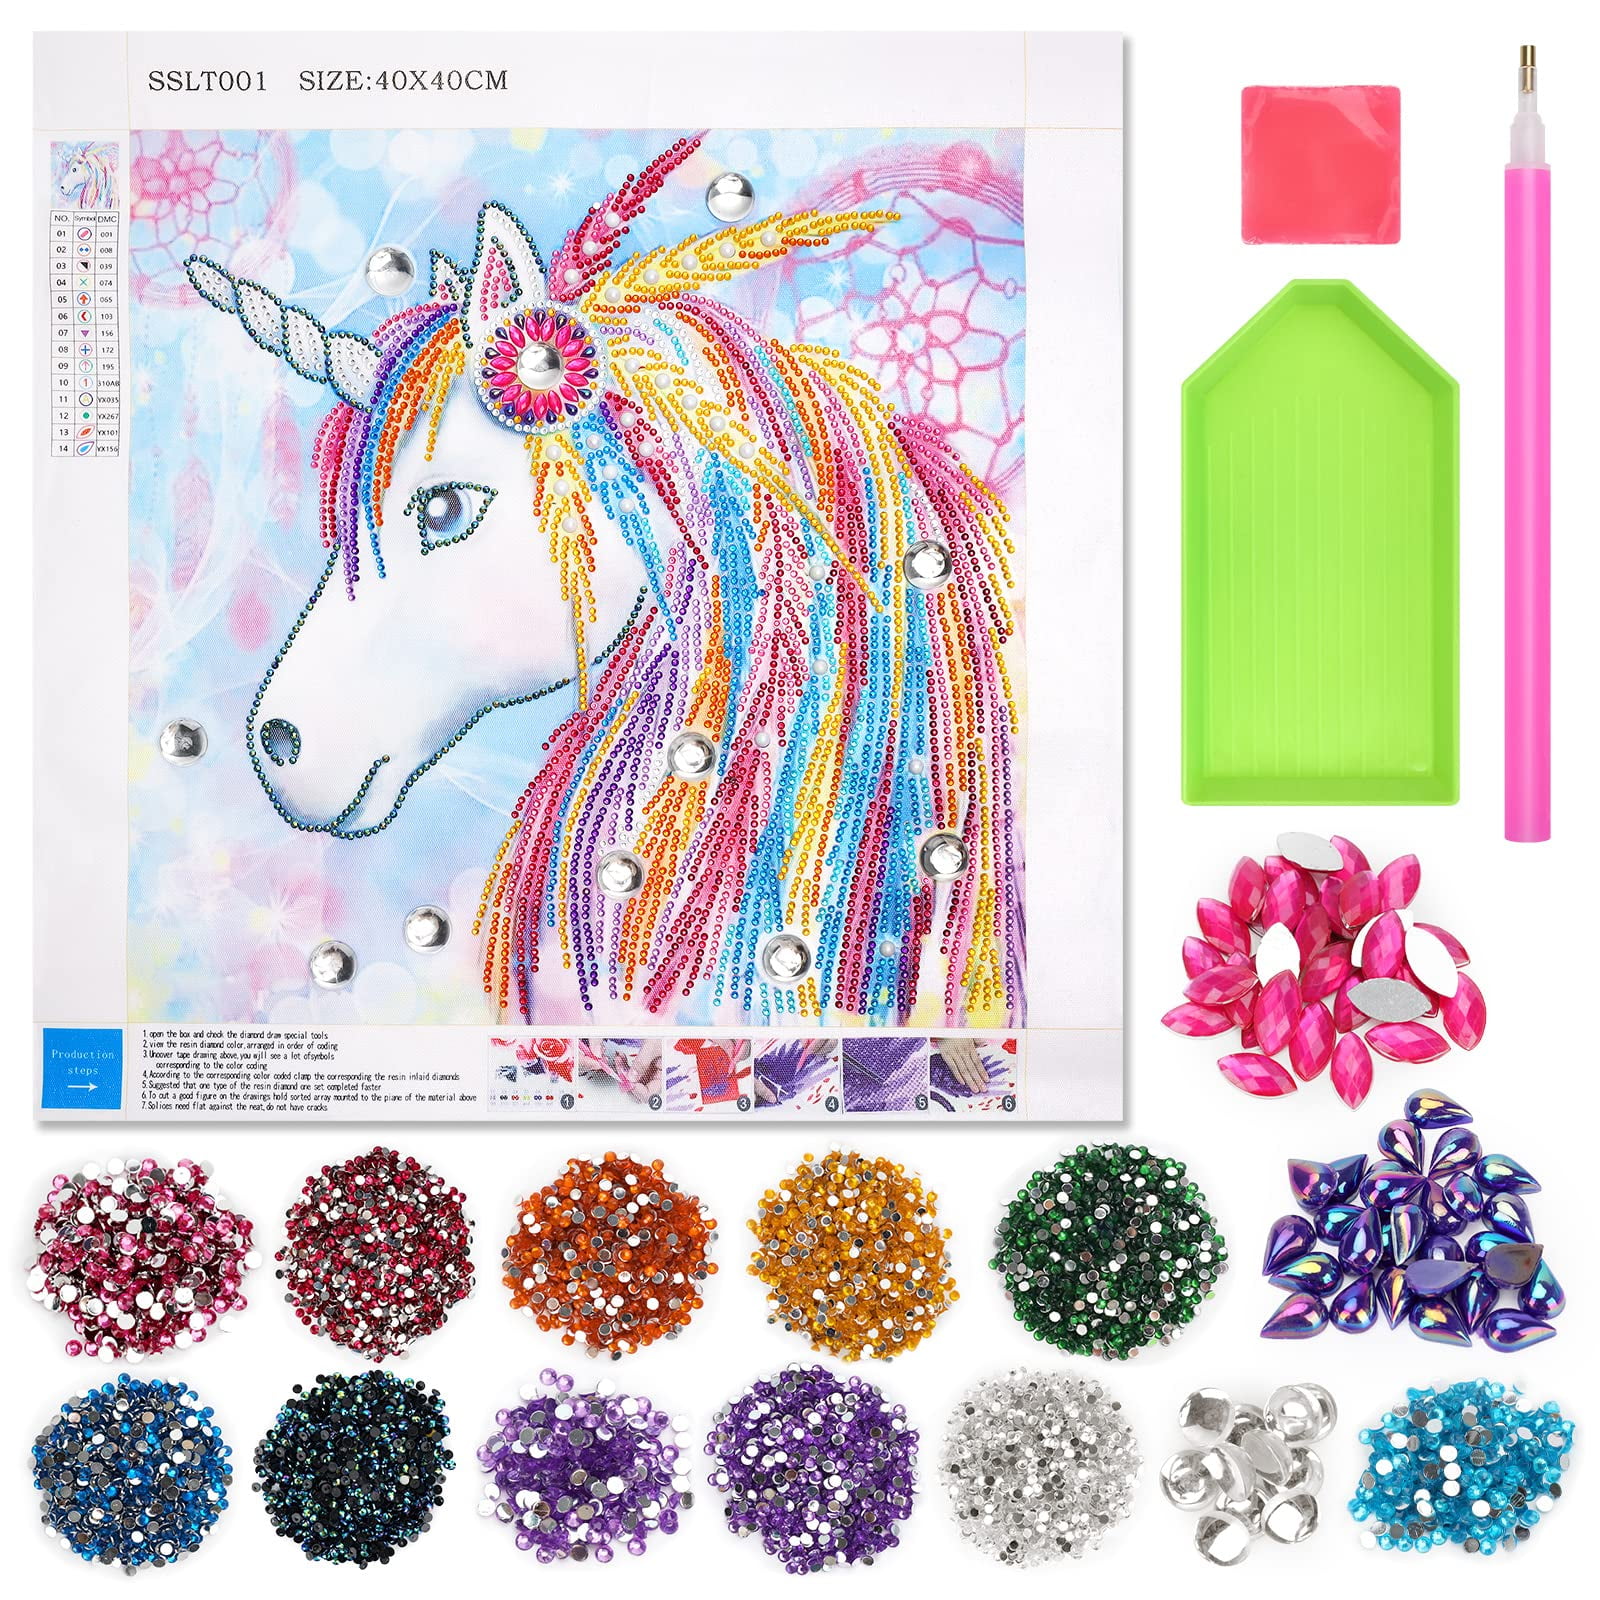 Dream Fun Diamond Arts Kits for Kids Age 6 7 8 9 10 11 12 Unicorn Presents  Arts and Crafts for Teenage Full Drill Painting by Number Kits for Children